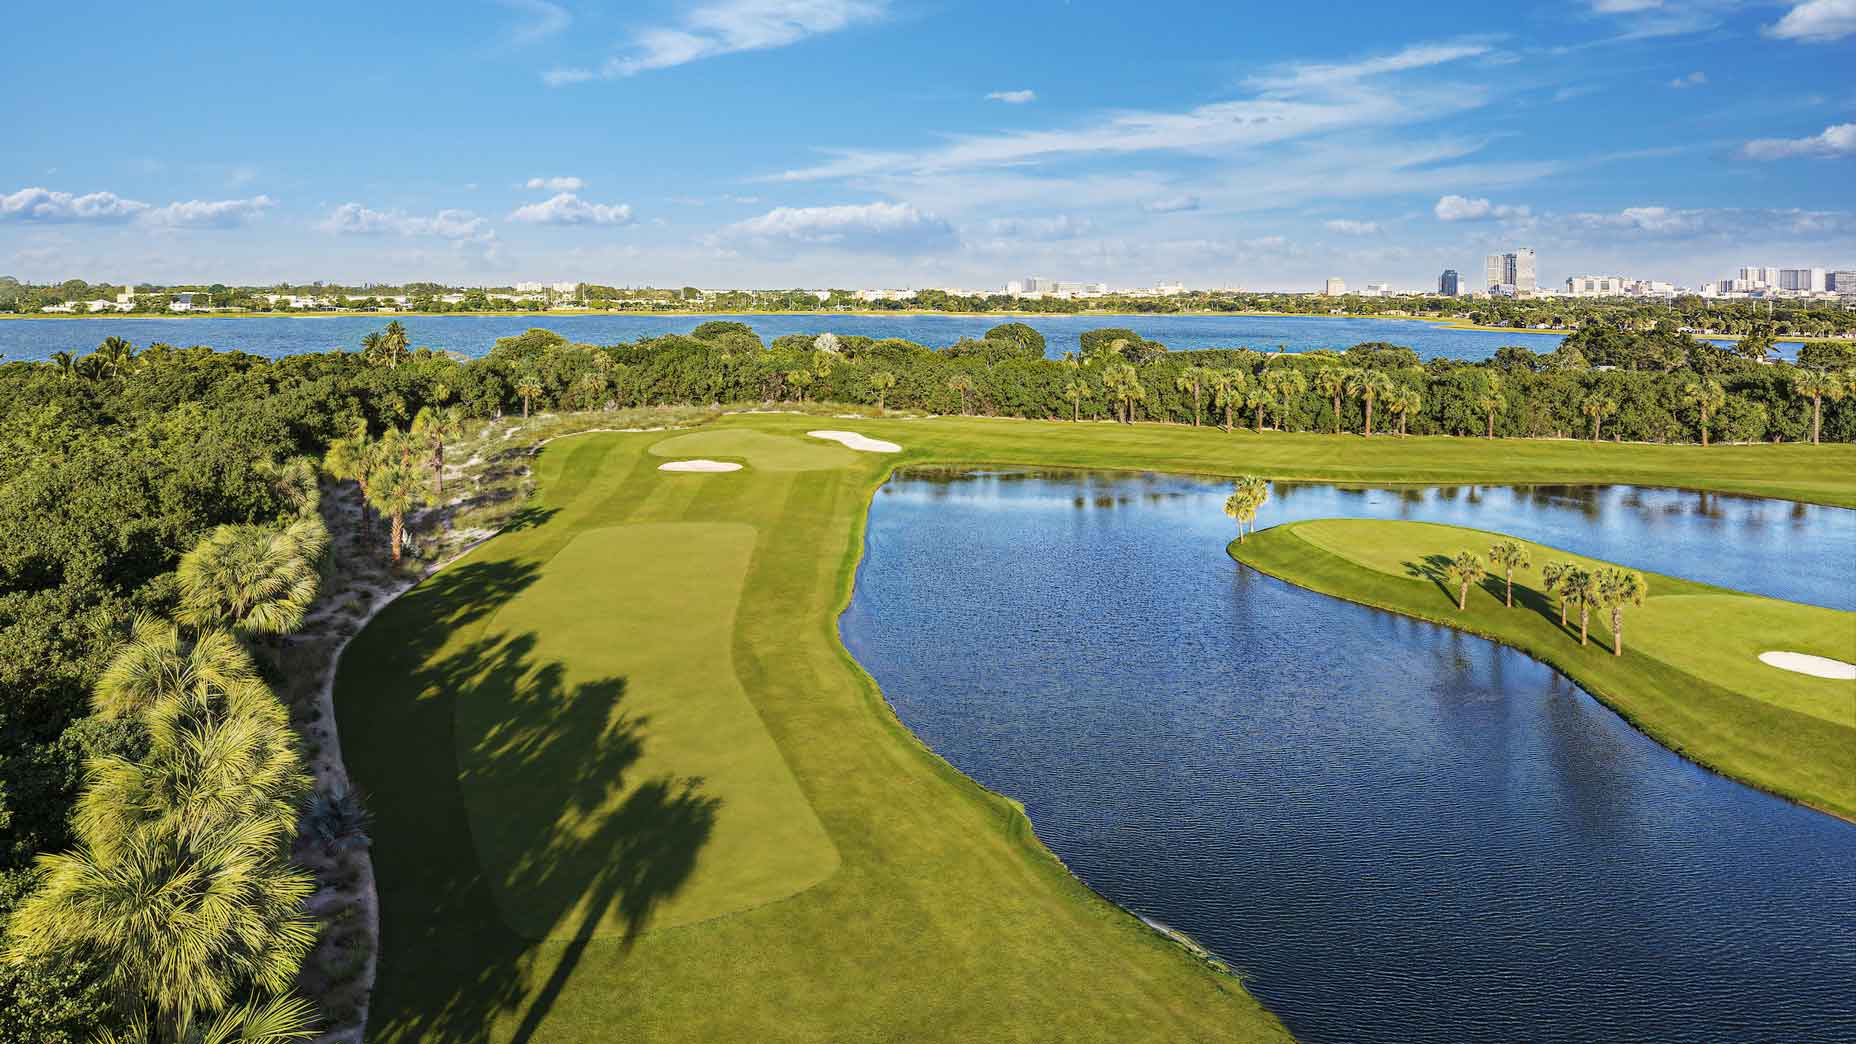 West Palm Beach’s first new private golf club in 25 years prepares for its debut